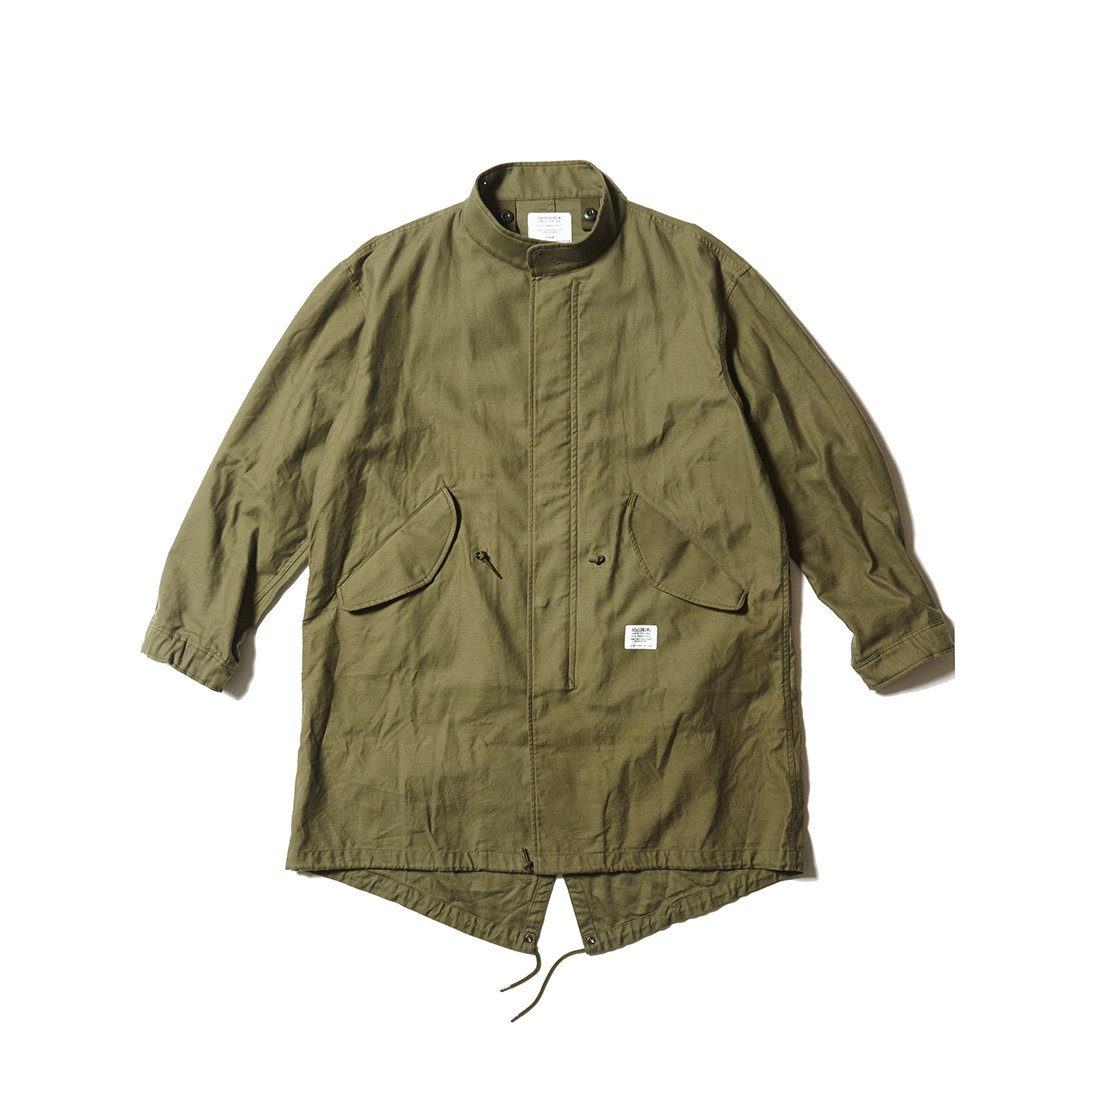 CAPTAINS HELM#FISH TAIL MILITARY JKT -SOLID